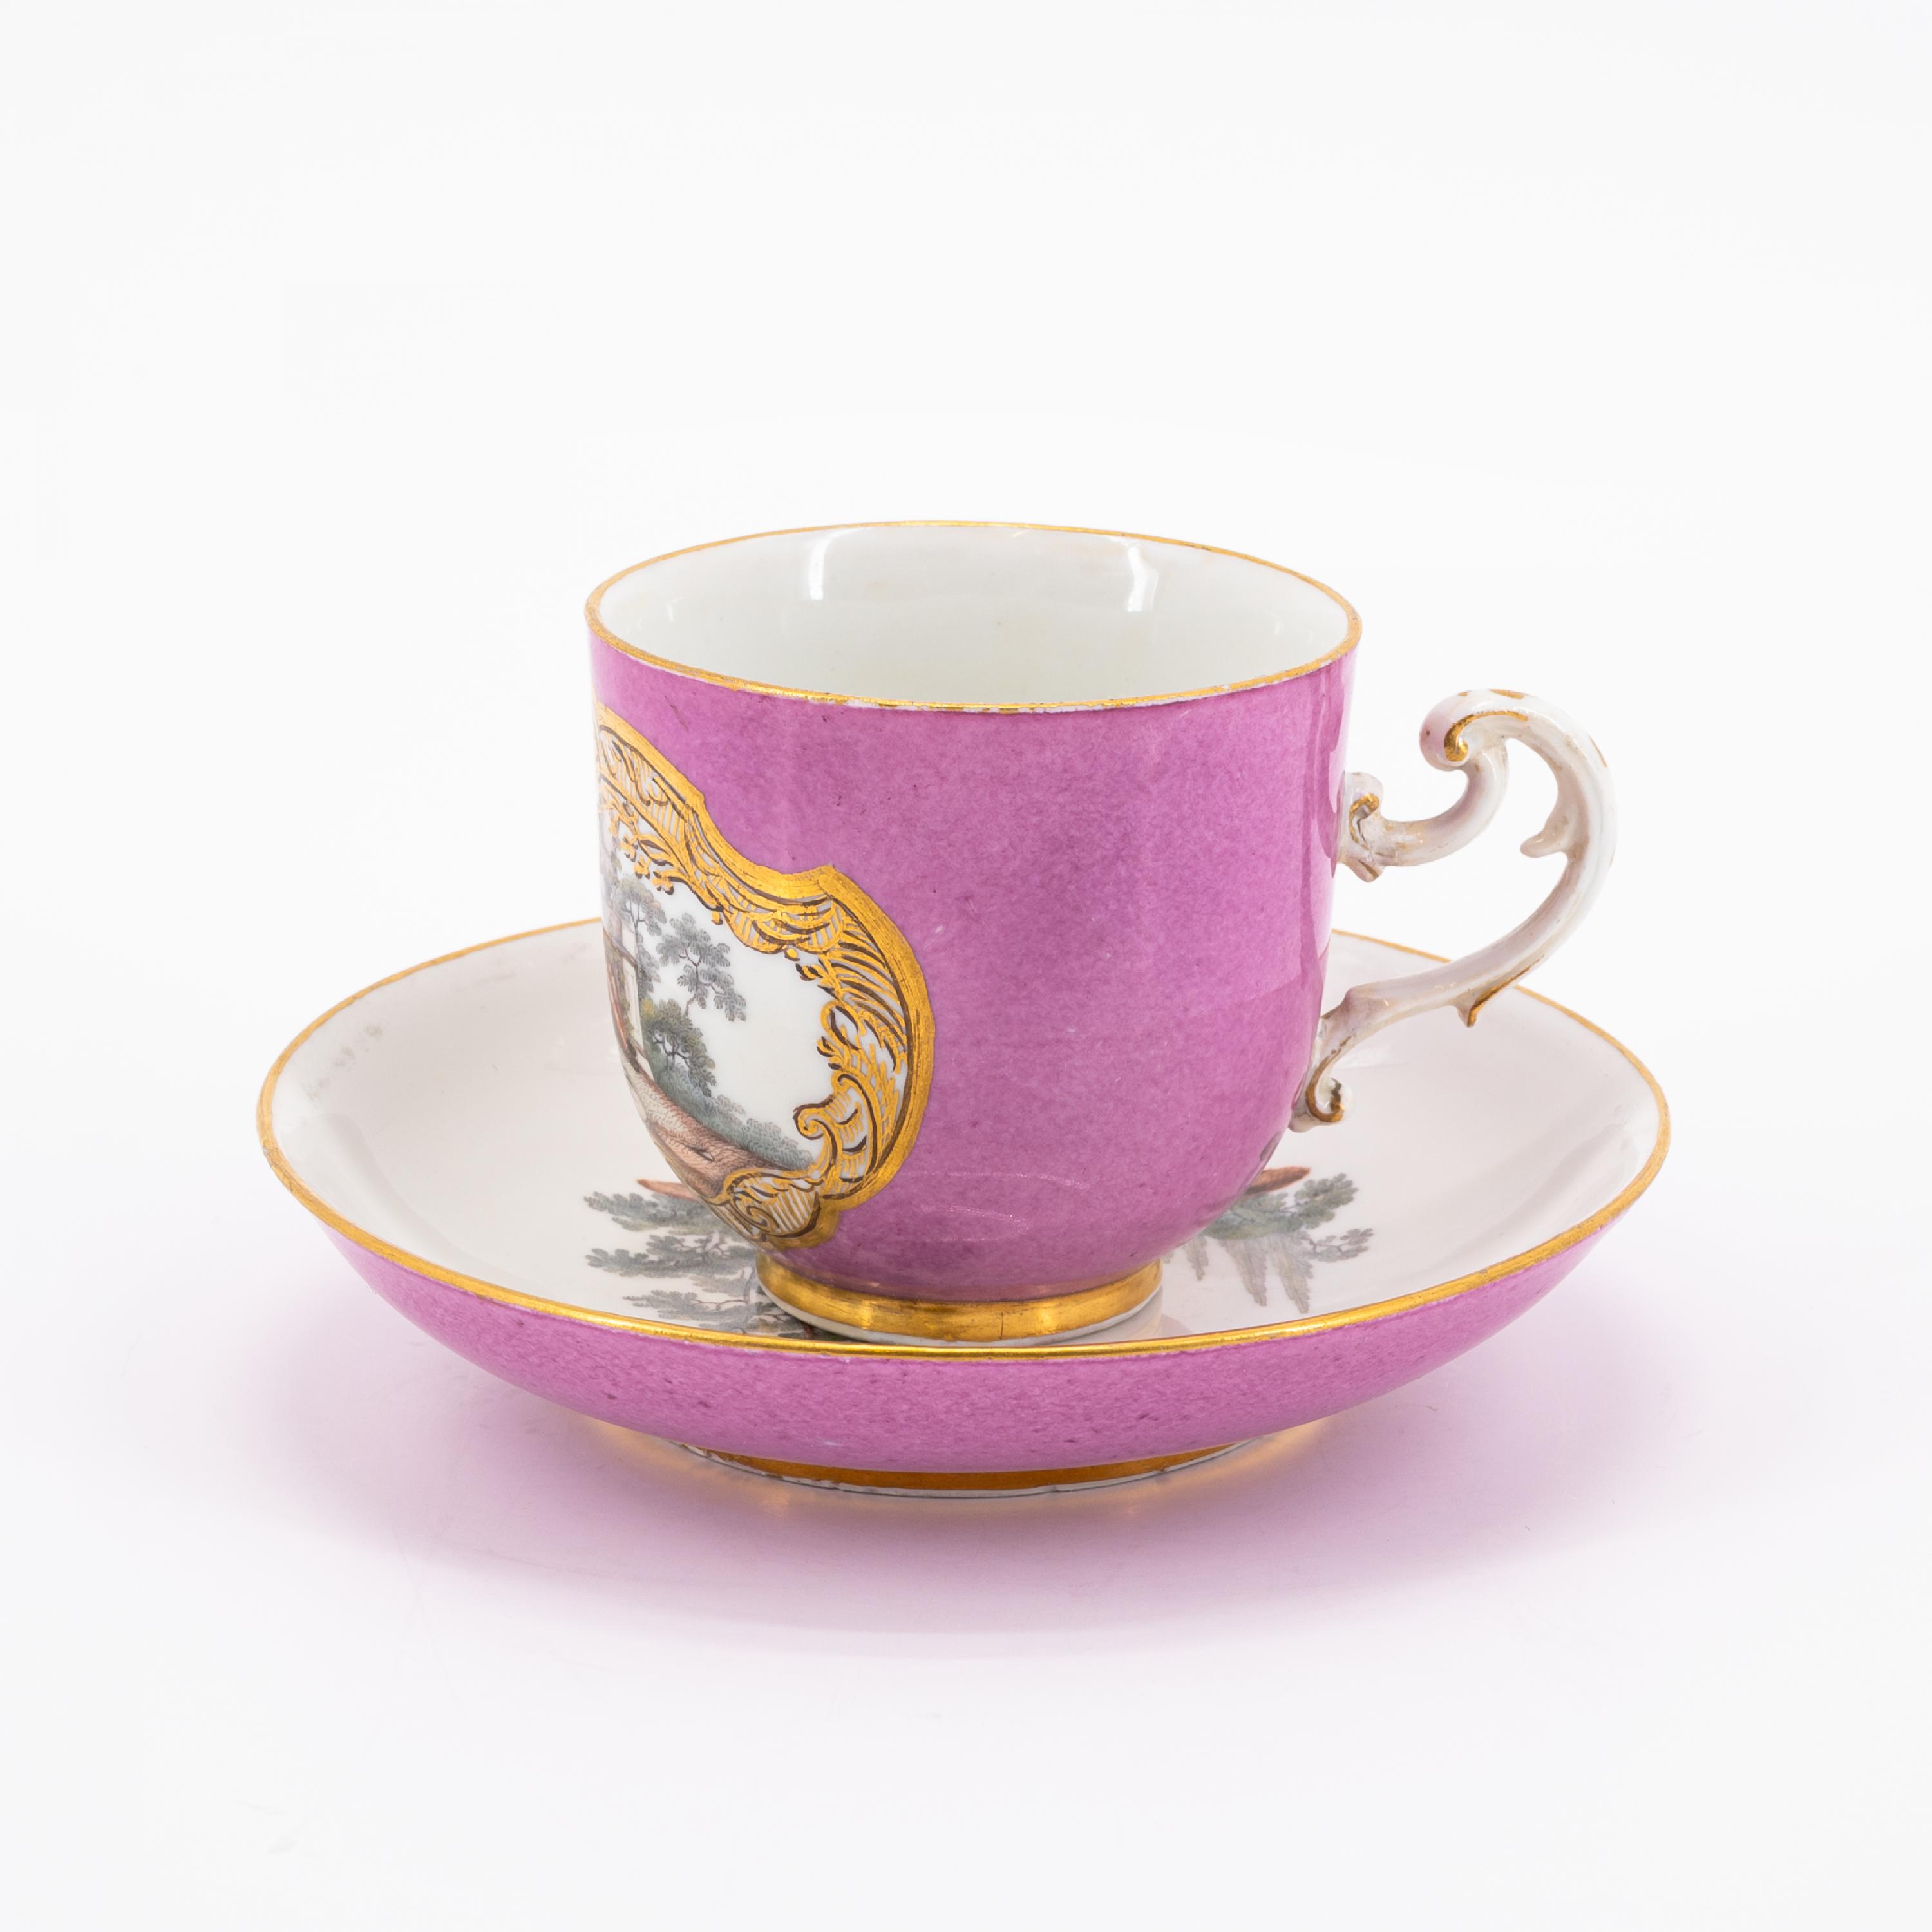 PORCELAIN SLOP BOWL, CUP WITH SAUCER AND PURPLE GROUND AND GALLANT PARK SCENES - Image 2 of 11